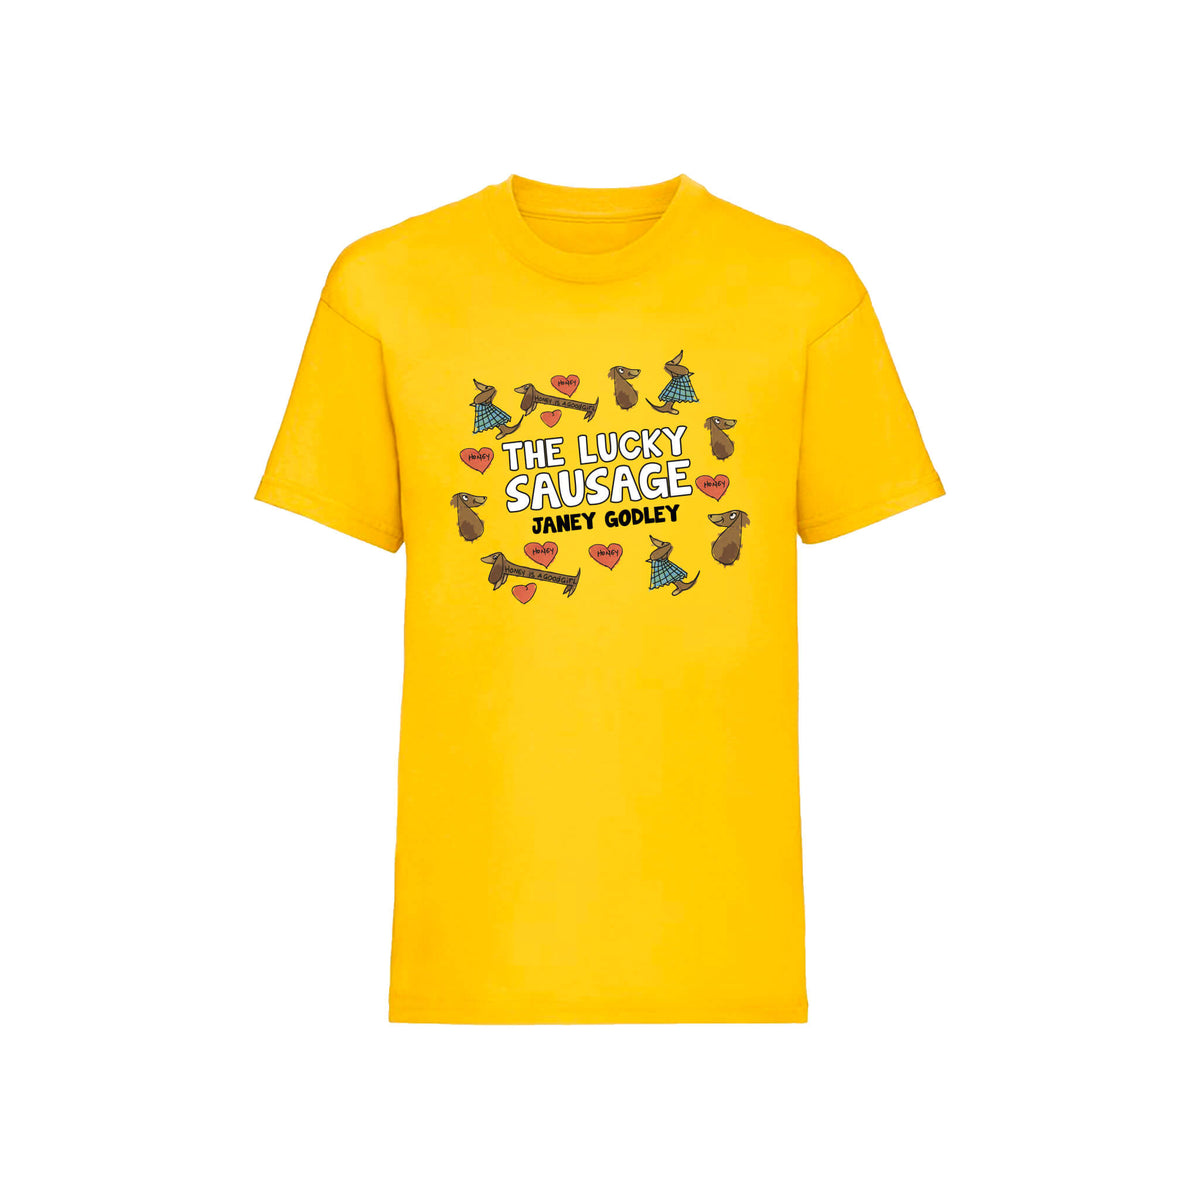 Honey the lucky sausage kids t-shirt. Janey Godley. Yellow